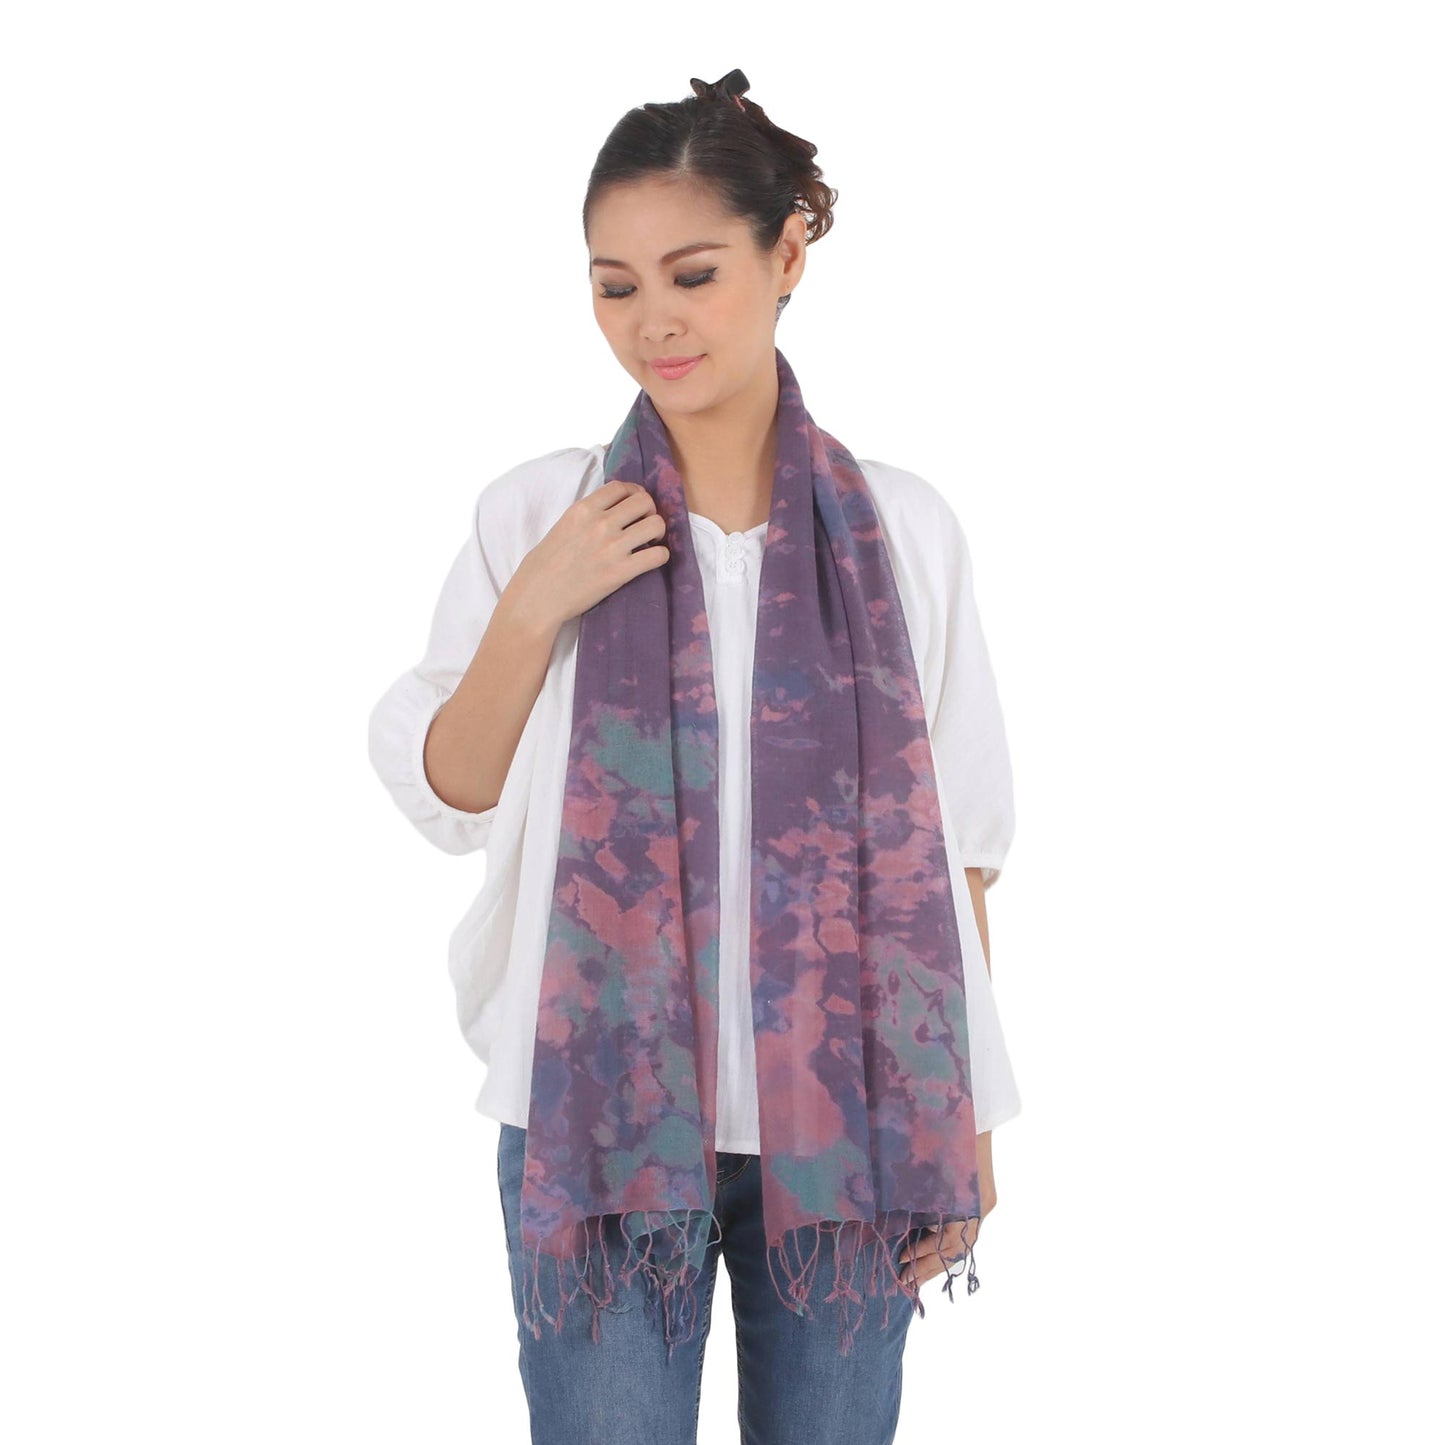 Fantastic Colors Tied-Dyed Cotton Wrap Scarf in Pink and Purple from Thailand